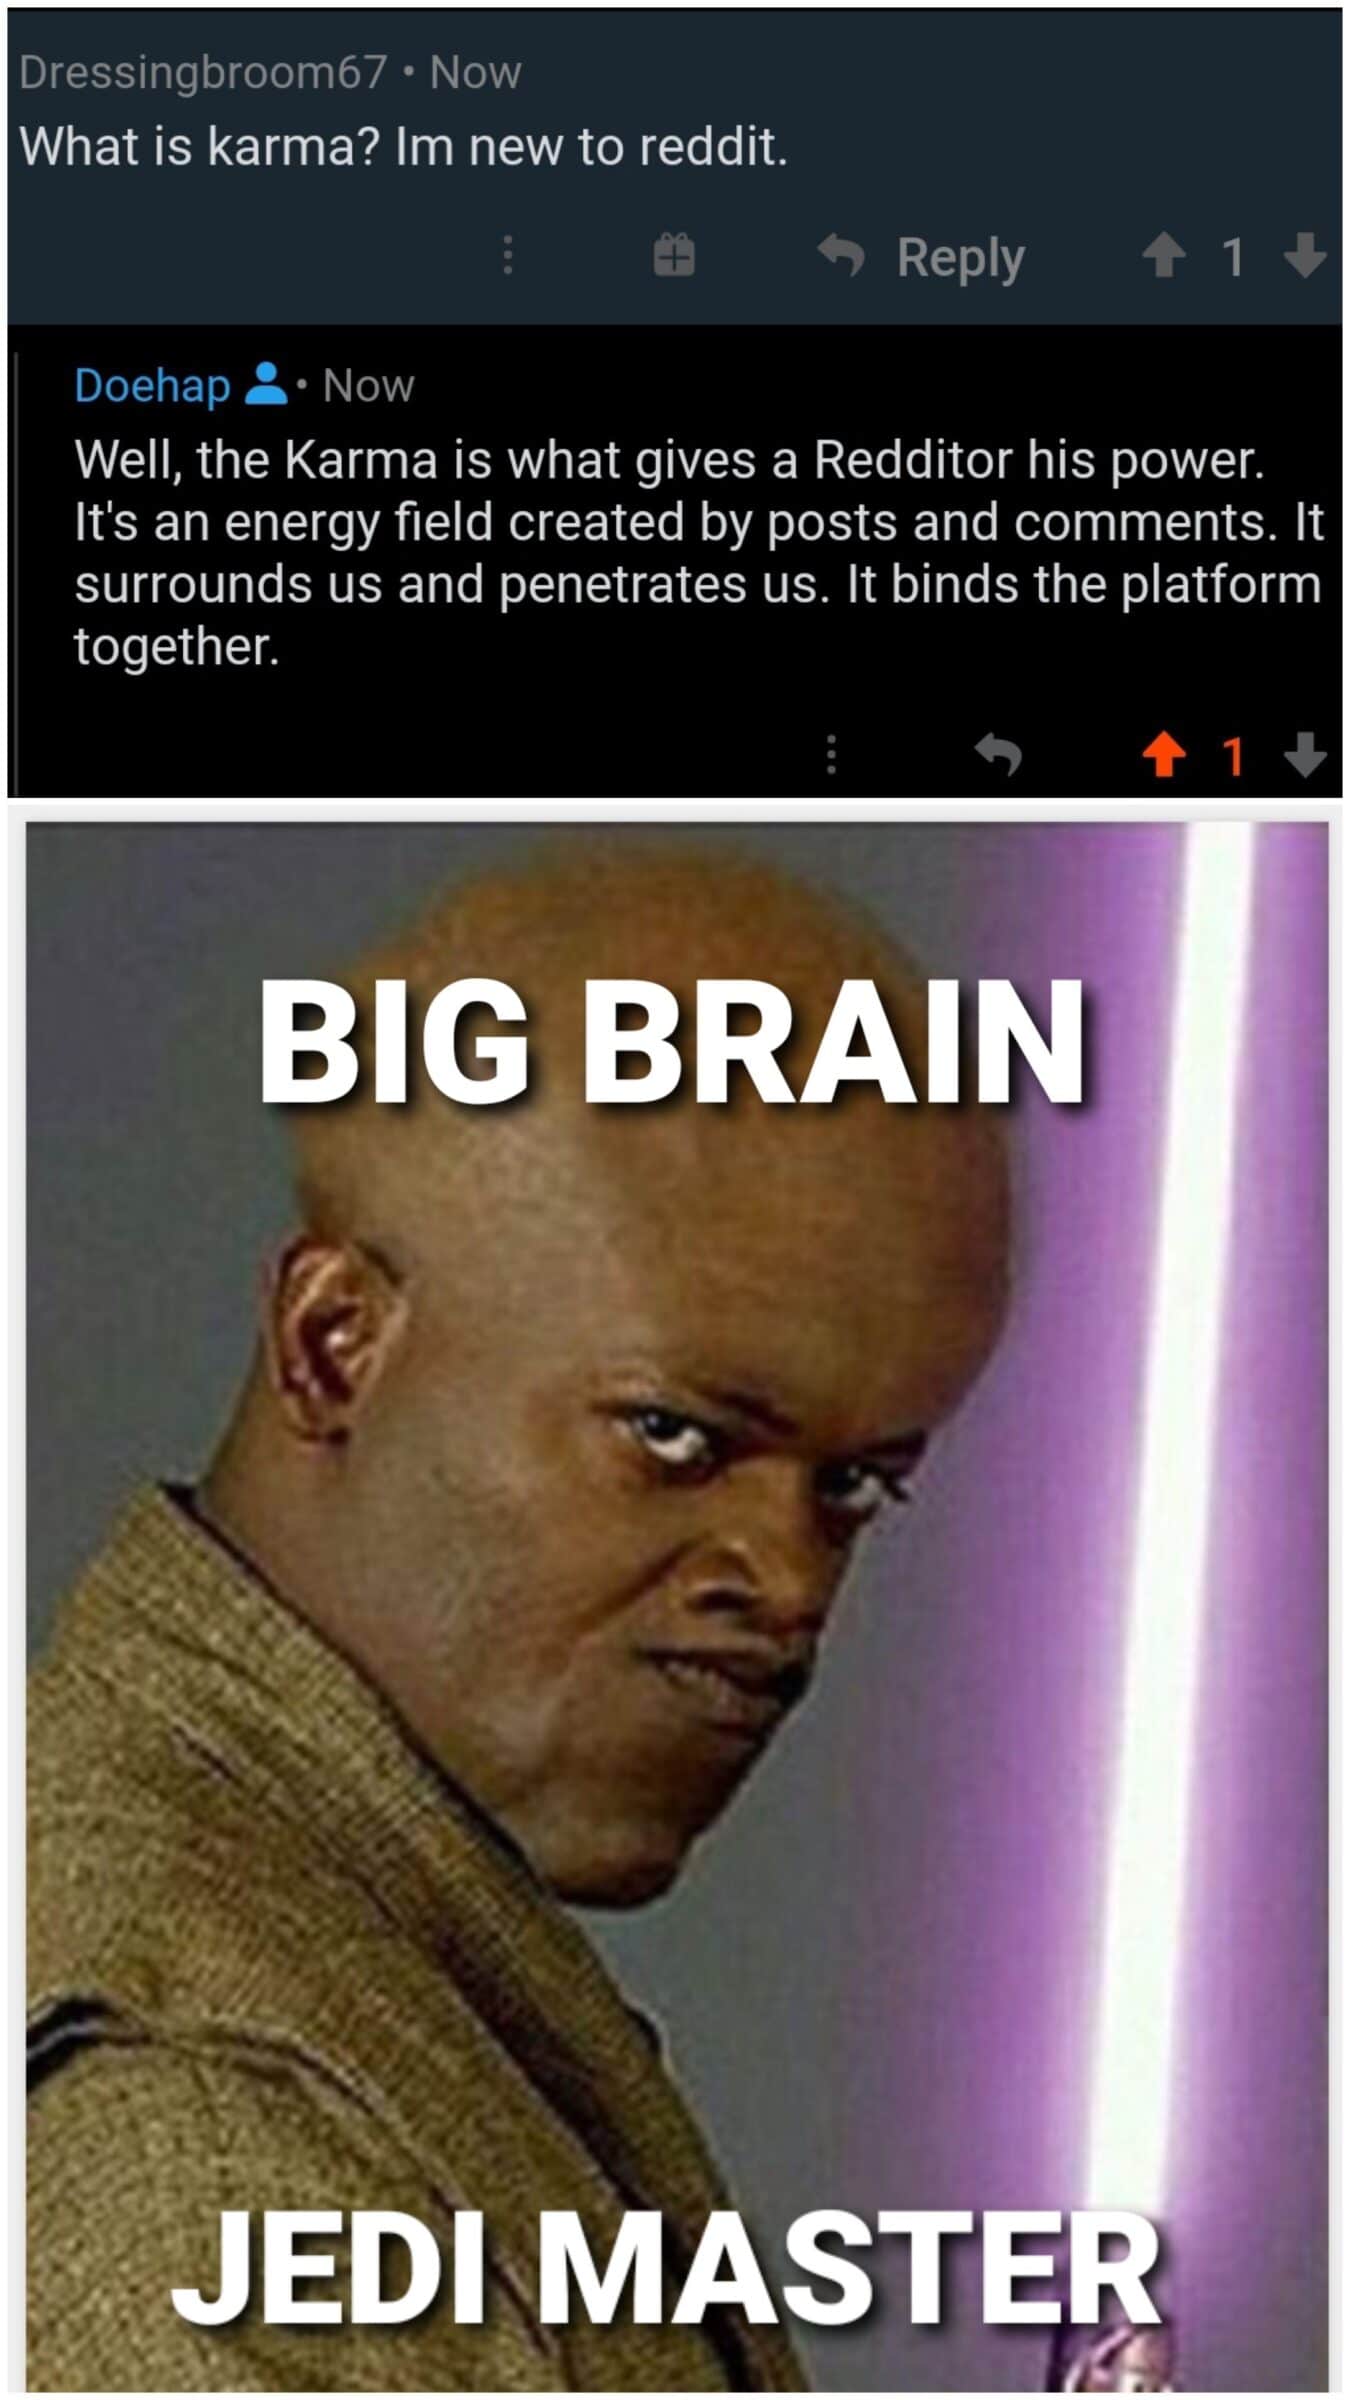 Ot-memes,  Star Wars Memes Ot-memes,  text: Dressingbroom67 • Now What is karma? 1m new to reddit. Doehap Now Well, the Karma is what gives a Redditor his power. It's an energy field created by posts and comments. It surrounds us and penetrates us. It binds the platform together. BIG BRAIN JEDI MASTE 